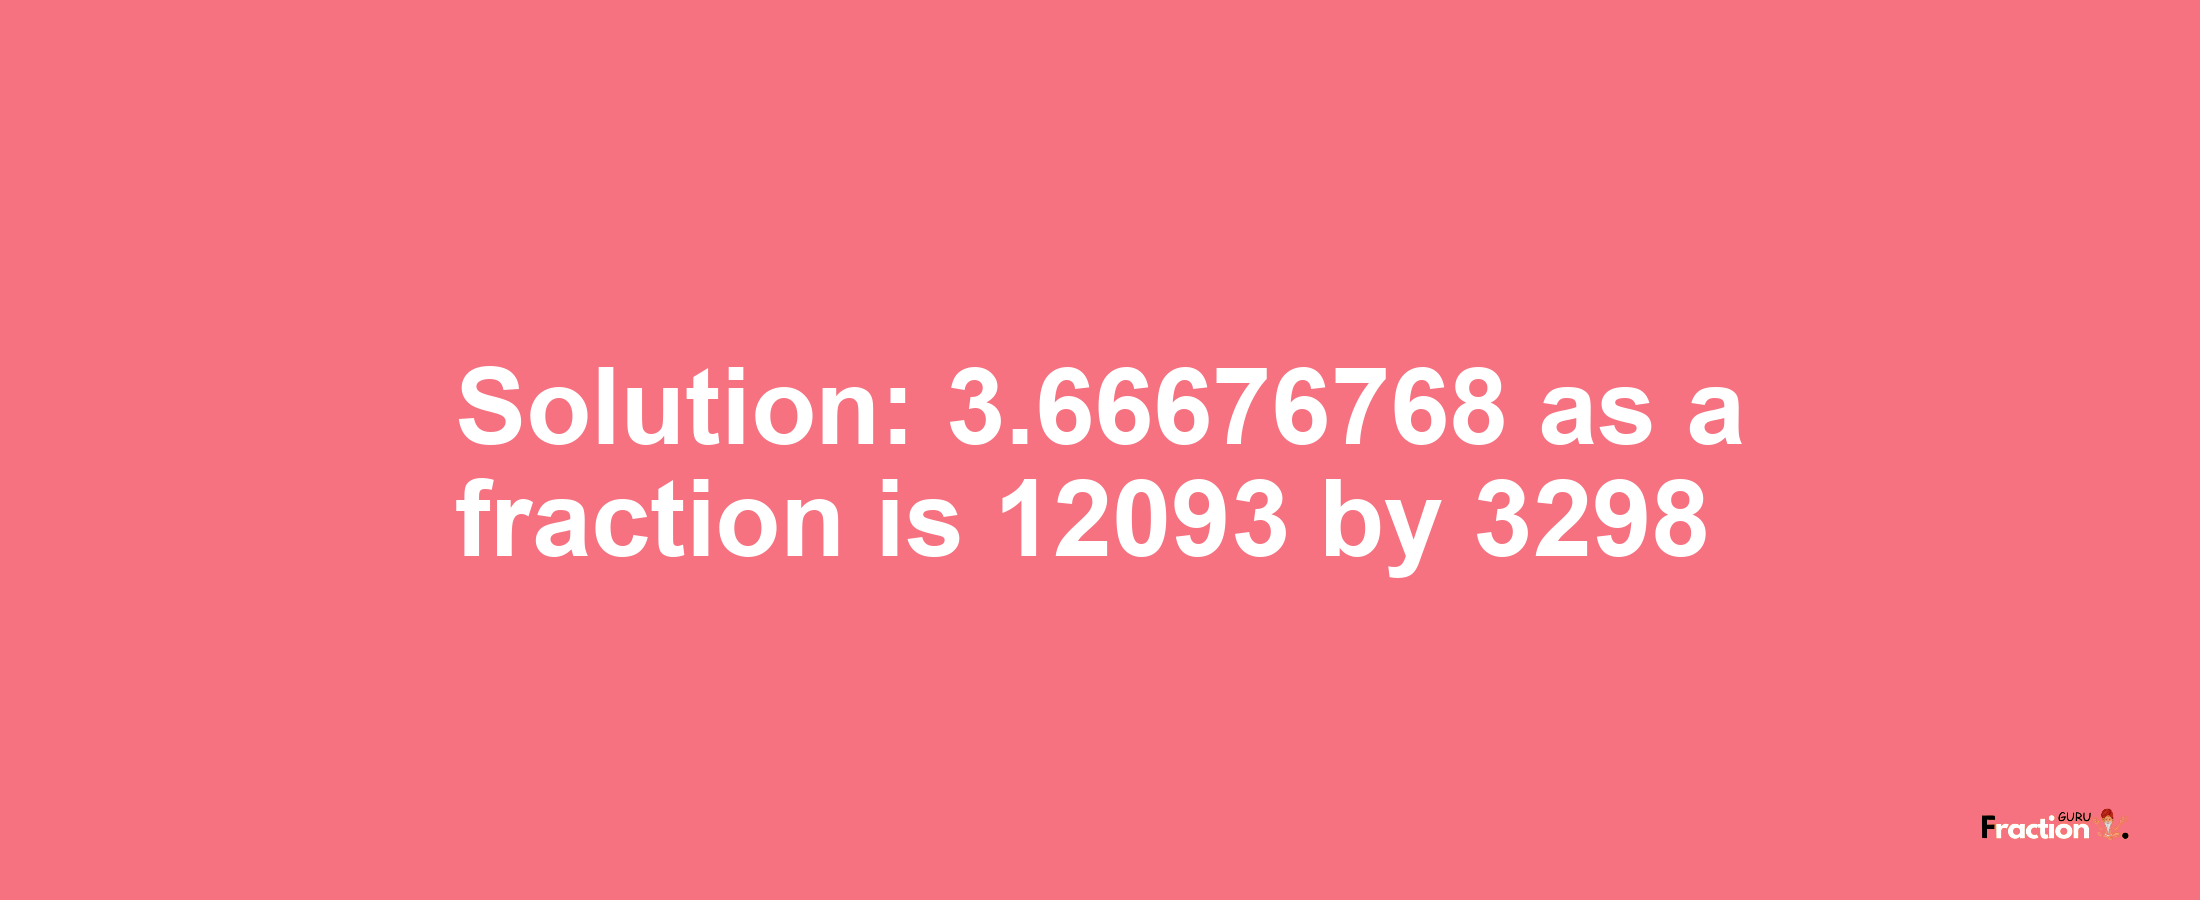 Solution:3.66676768 as a fraction is 12093/3298